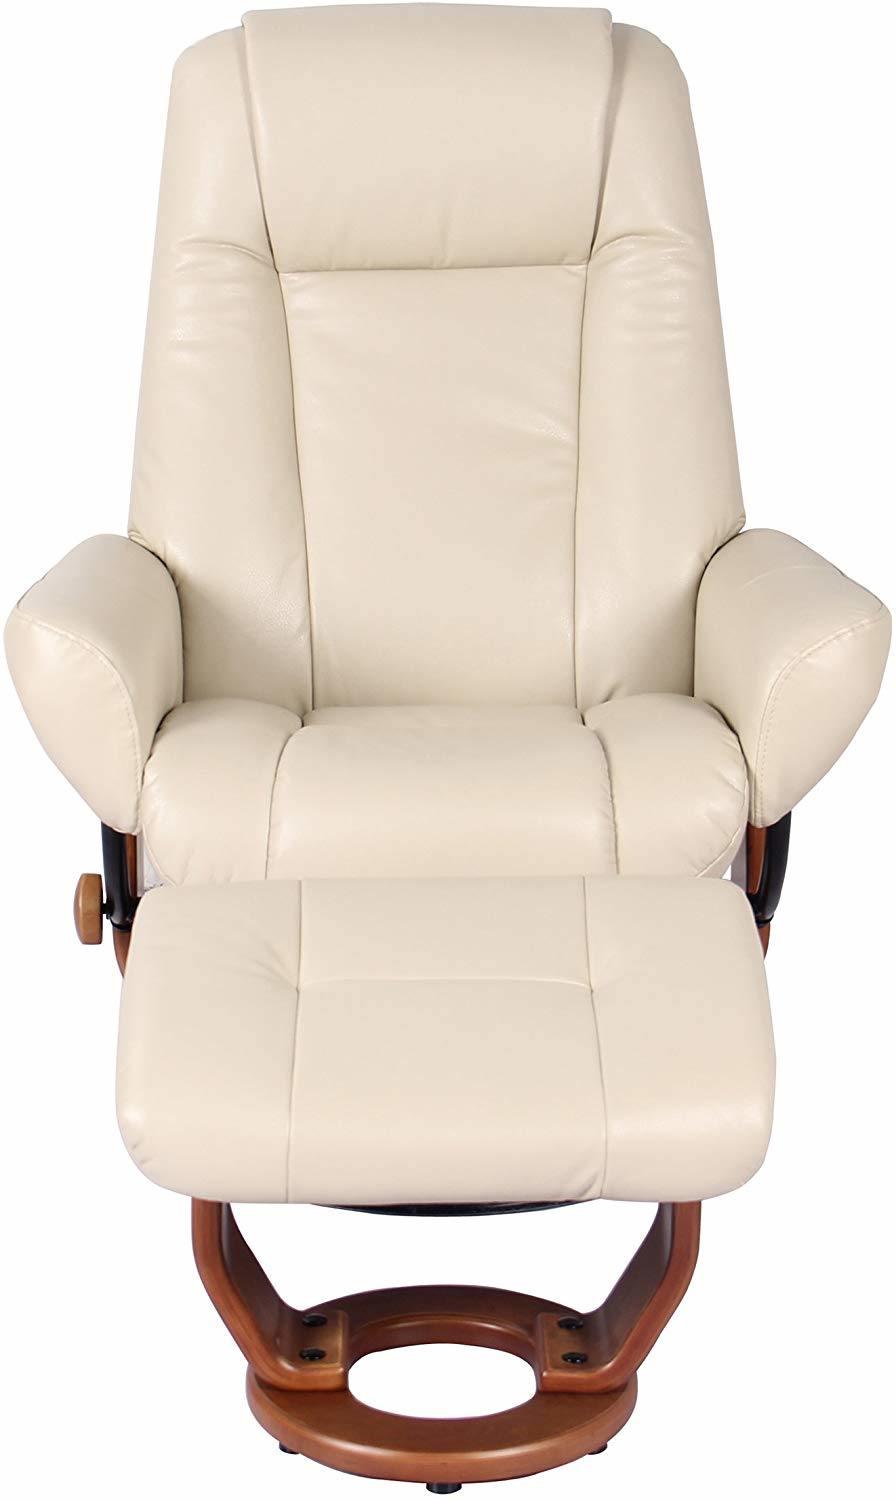 Jky Furniture 8 Points Vibration Massage Functions (2 In Ottoman 6 In Chair) Leather Leisure Chair with Ottoman